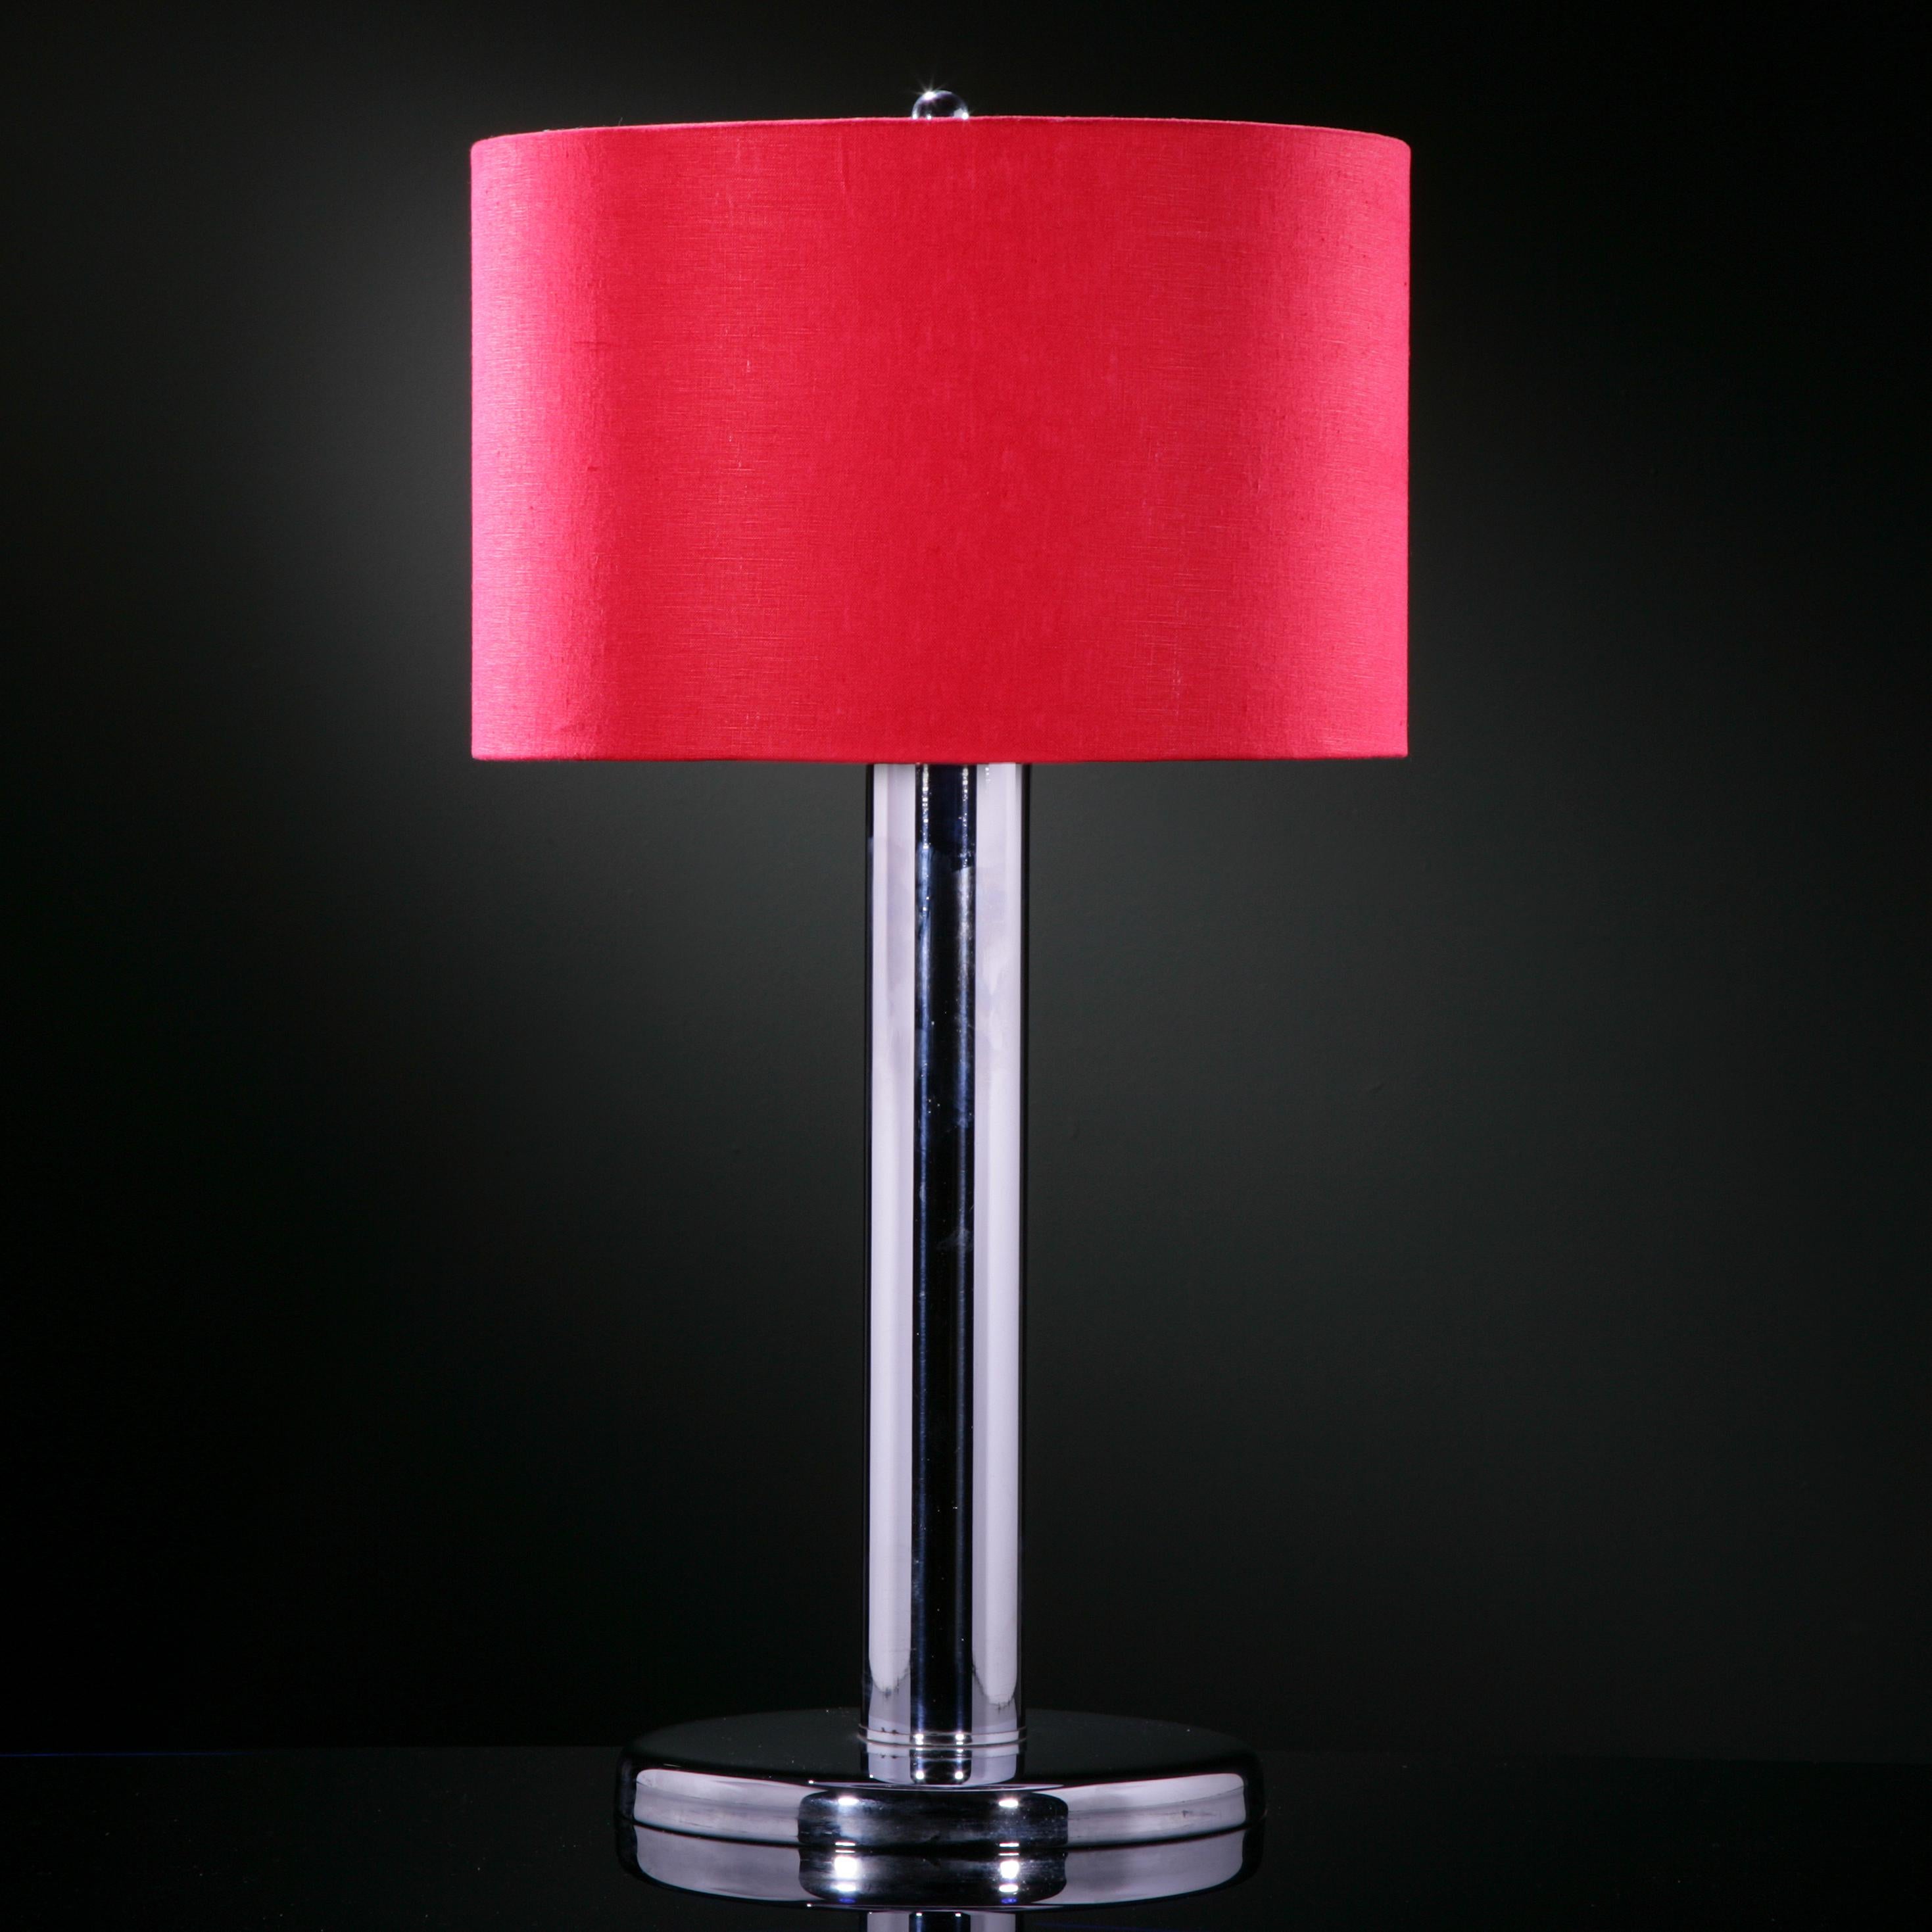 A single nickel-plated tubular table lamp with a red linen shade, 1960s.